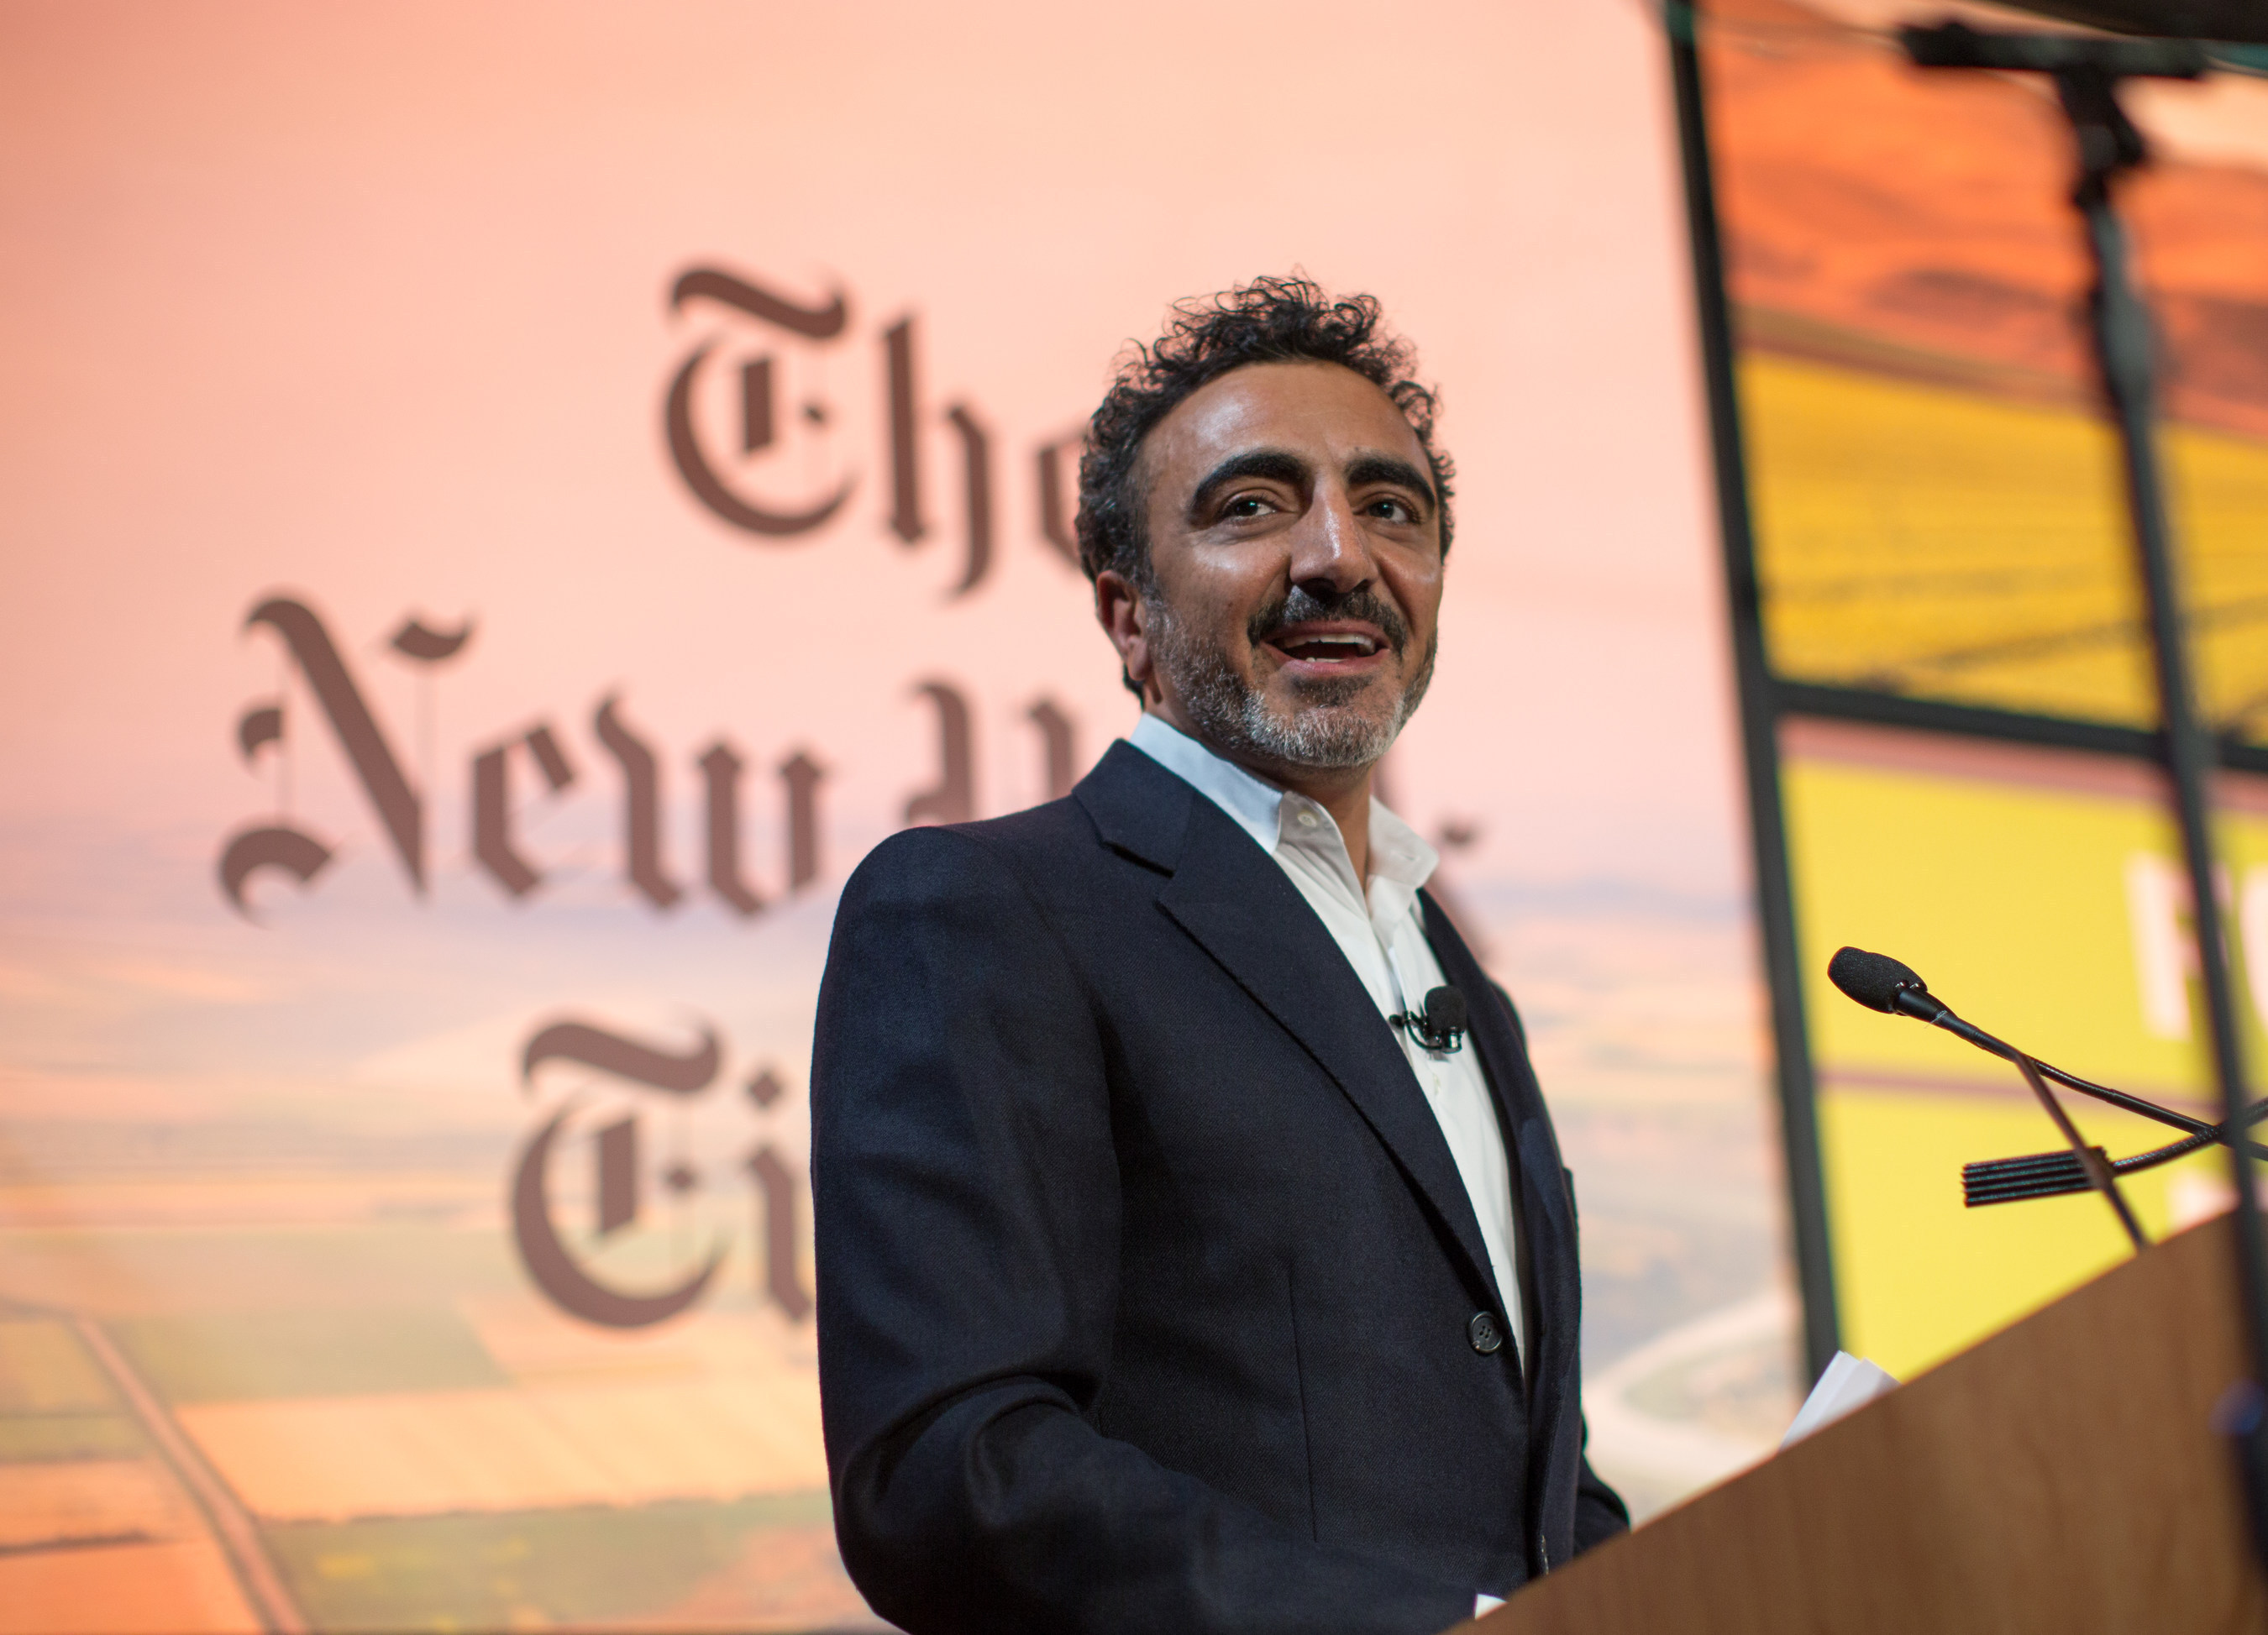 Hamdi Ulukaya, founder and CEO, Chobani, announces the Chobani Food Incubator at the New York Times Food for Tomorrow Conference at Stone Barns in Westchester County, NY.